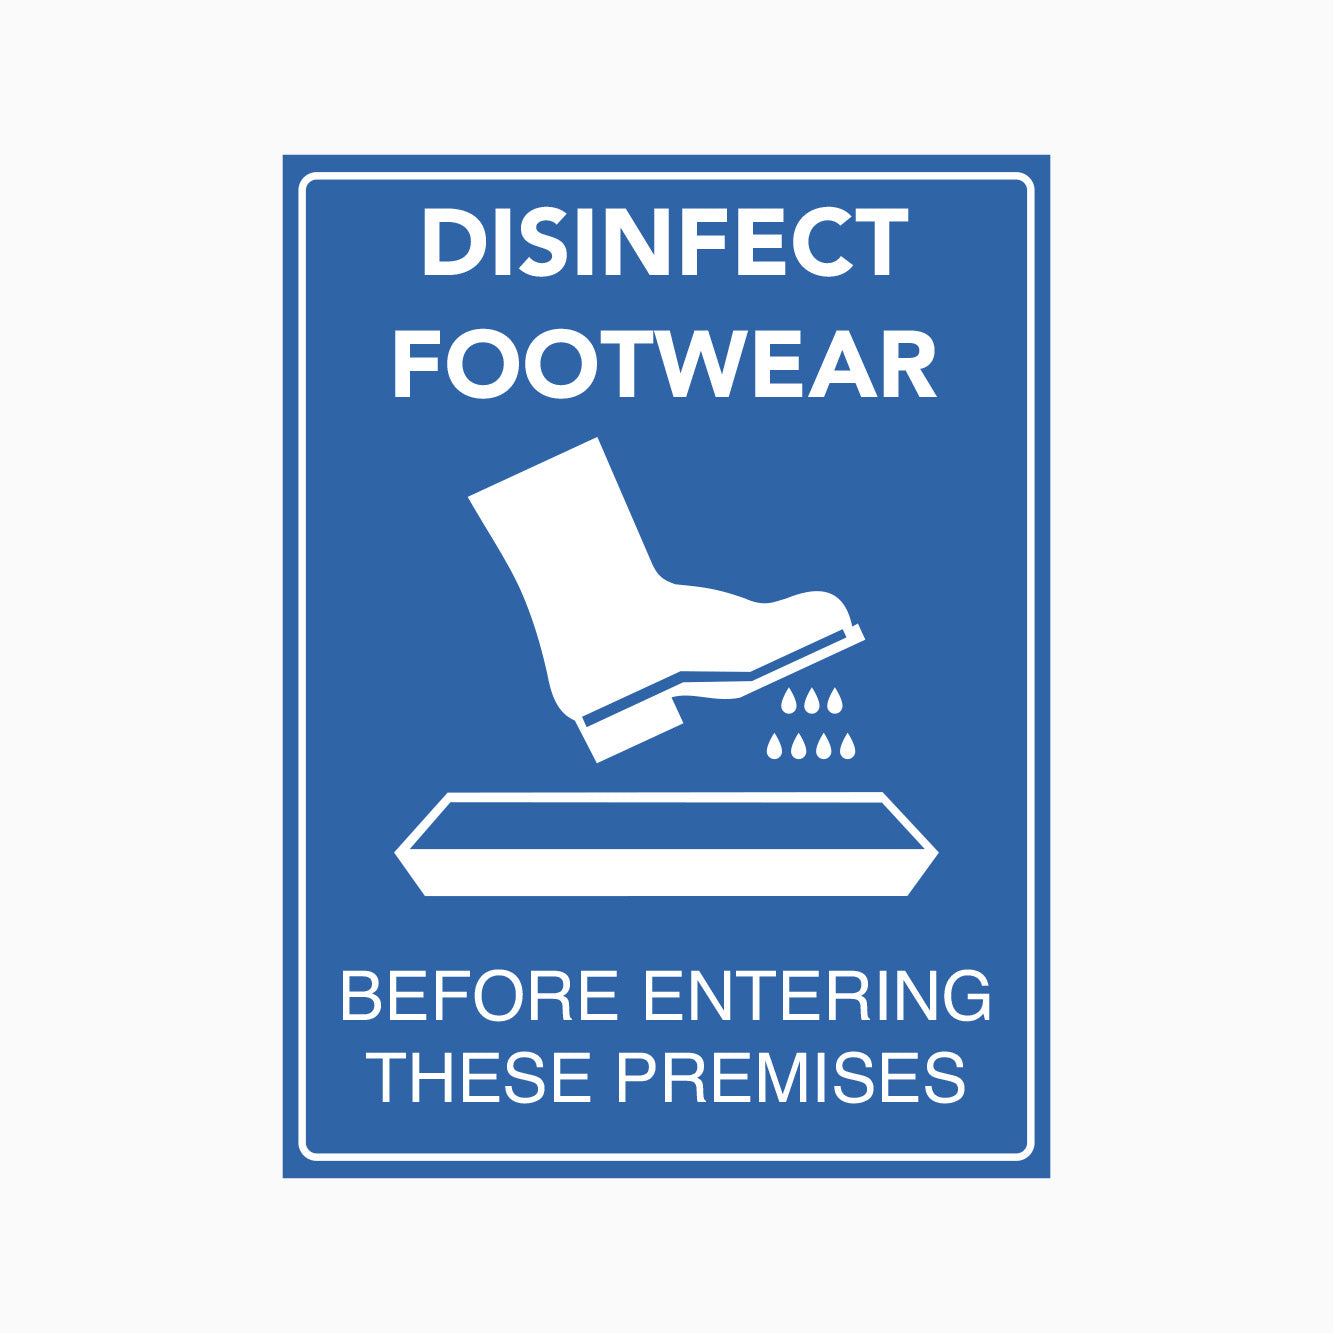 DISINFECT FOOTWEAR BEFORE ENTERING THESE PREMISES SIGN